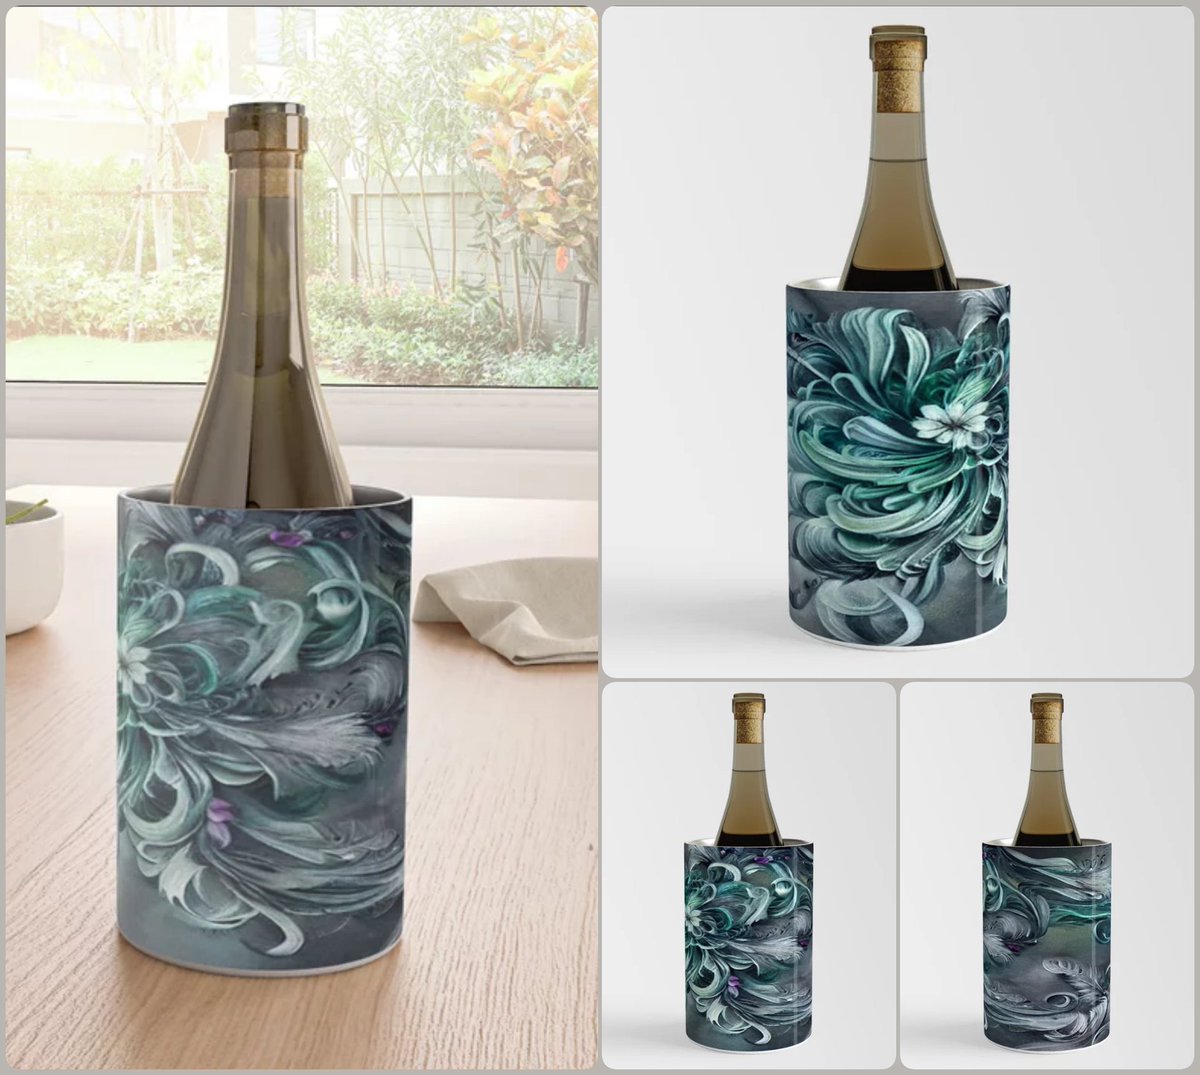 Cascading Elegance Wine Chiller~Art Exquisite!~ #coasters #gifts #trays #mugs #coffee #society6 #travel #coolers #artfalaxy #art #accents #modern #trendy #wine #water #interior #placemats #tablecloths #runners #purple #green #black #gray society6.com/product/cascad…